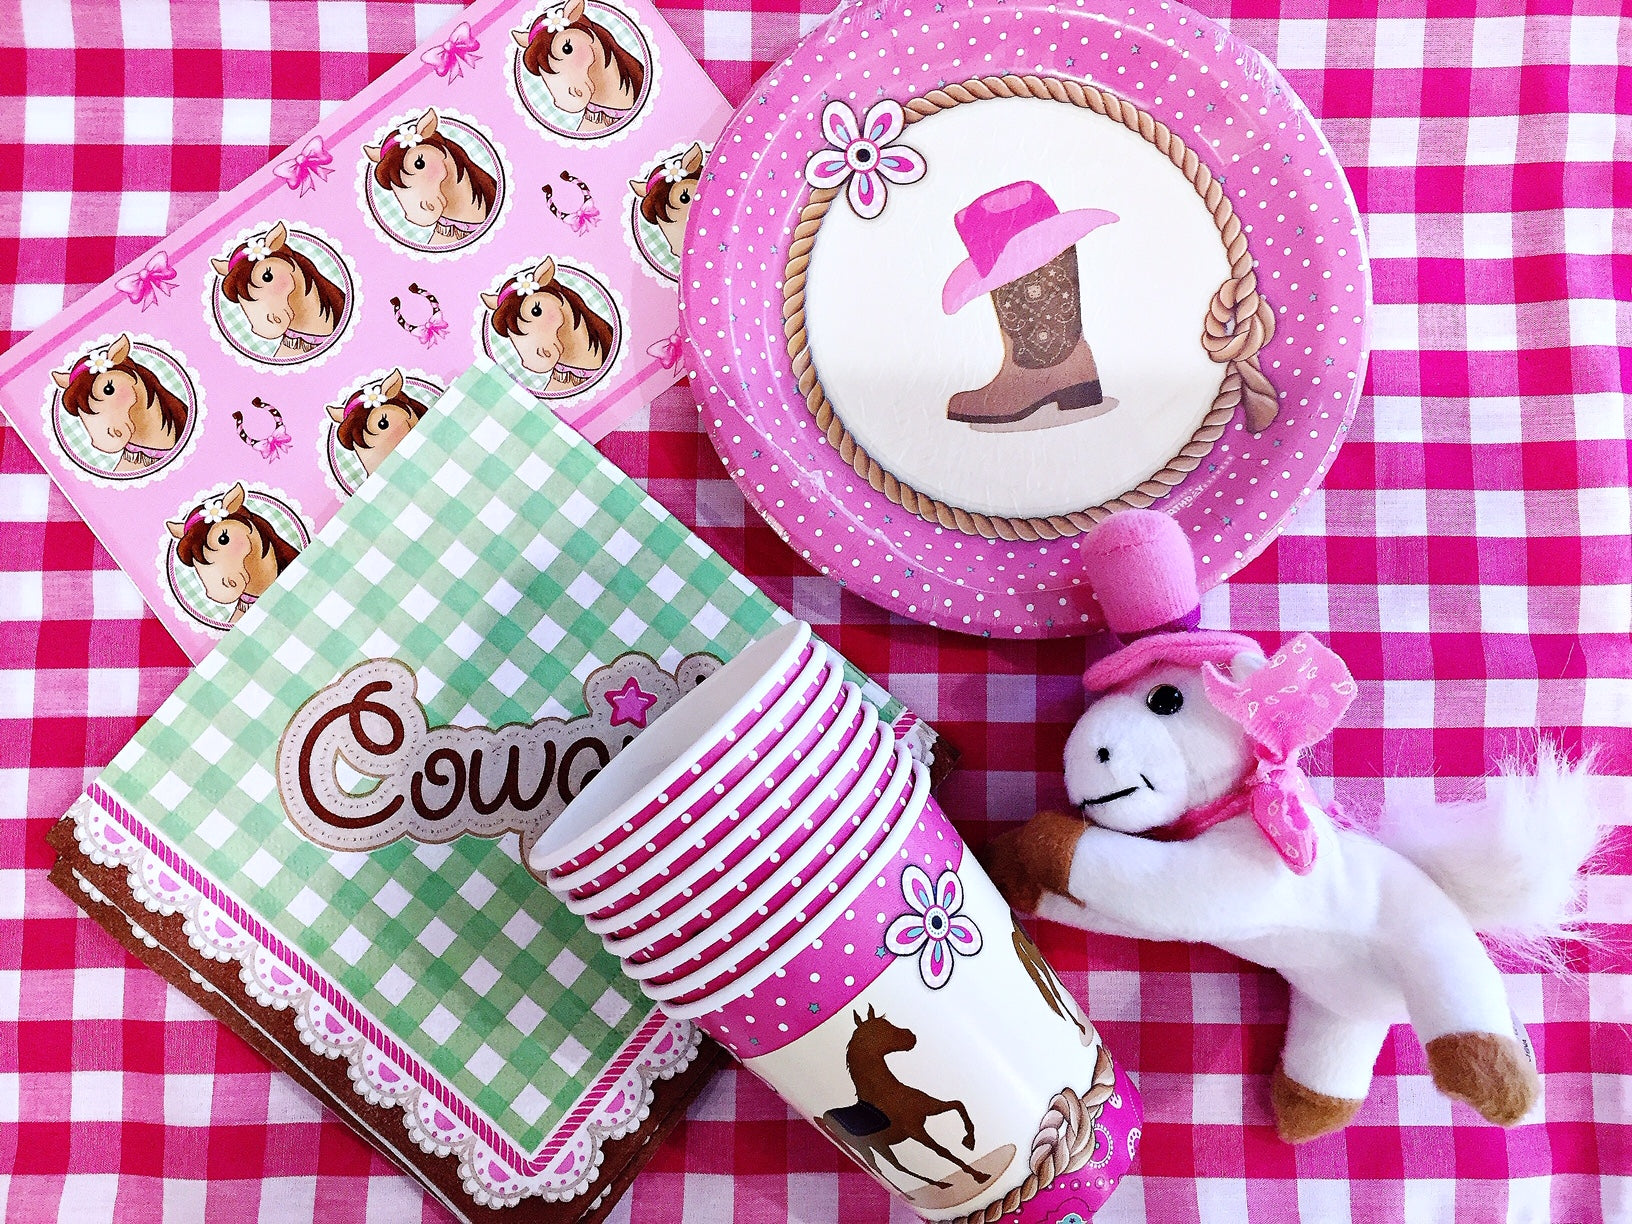 Cowgirl party supplies